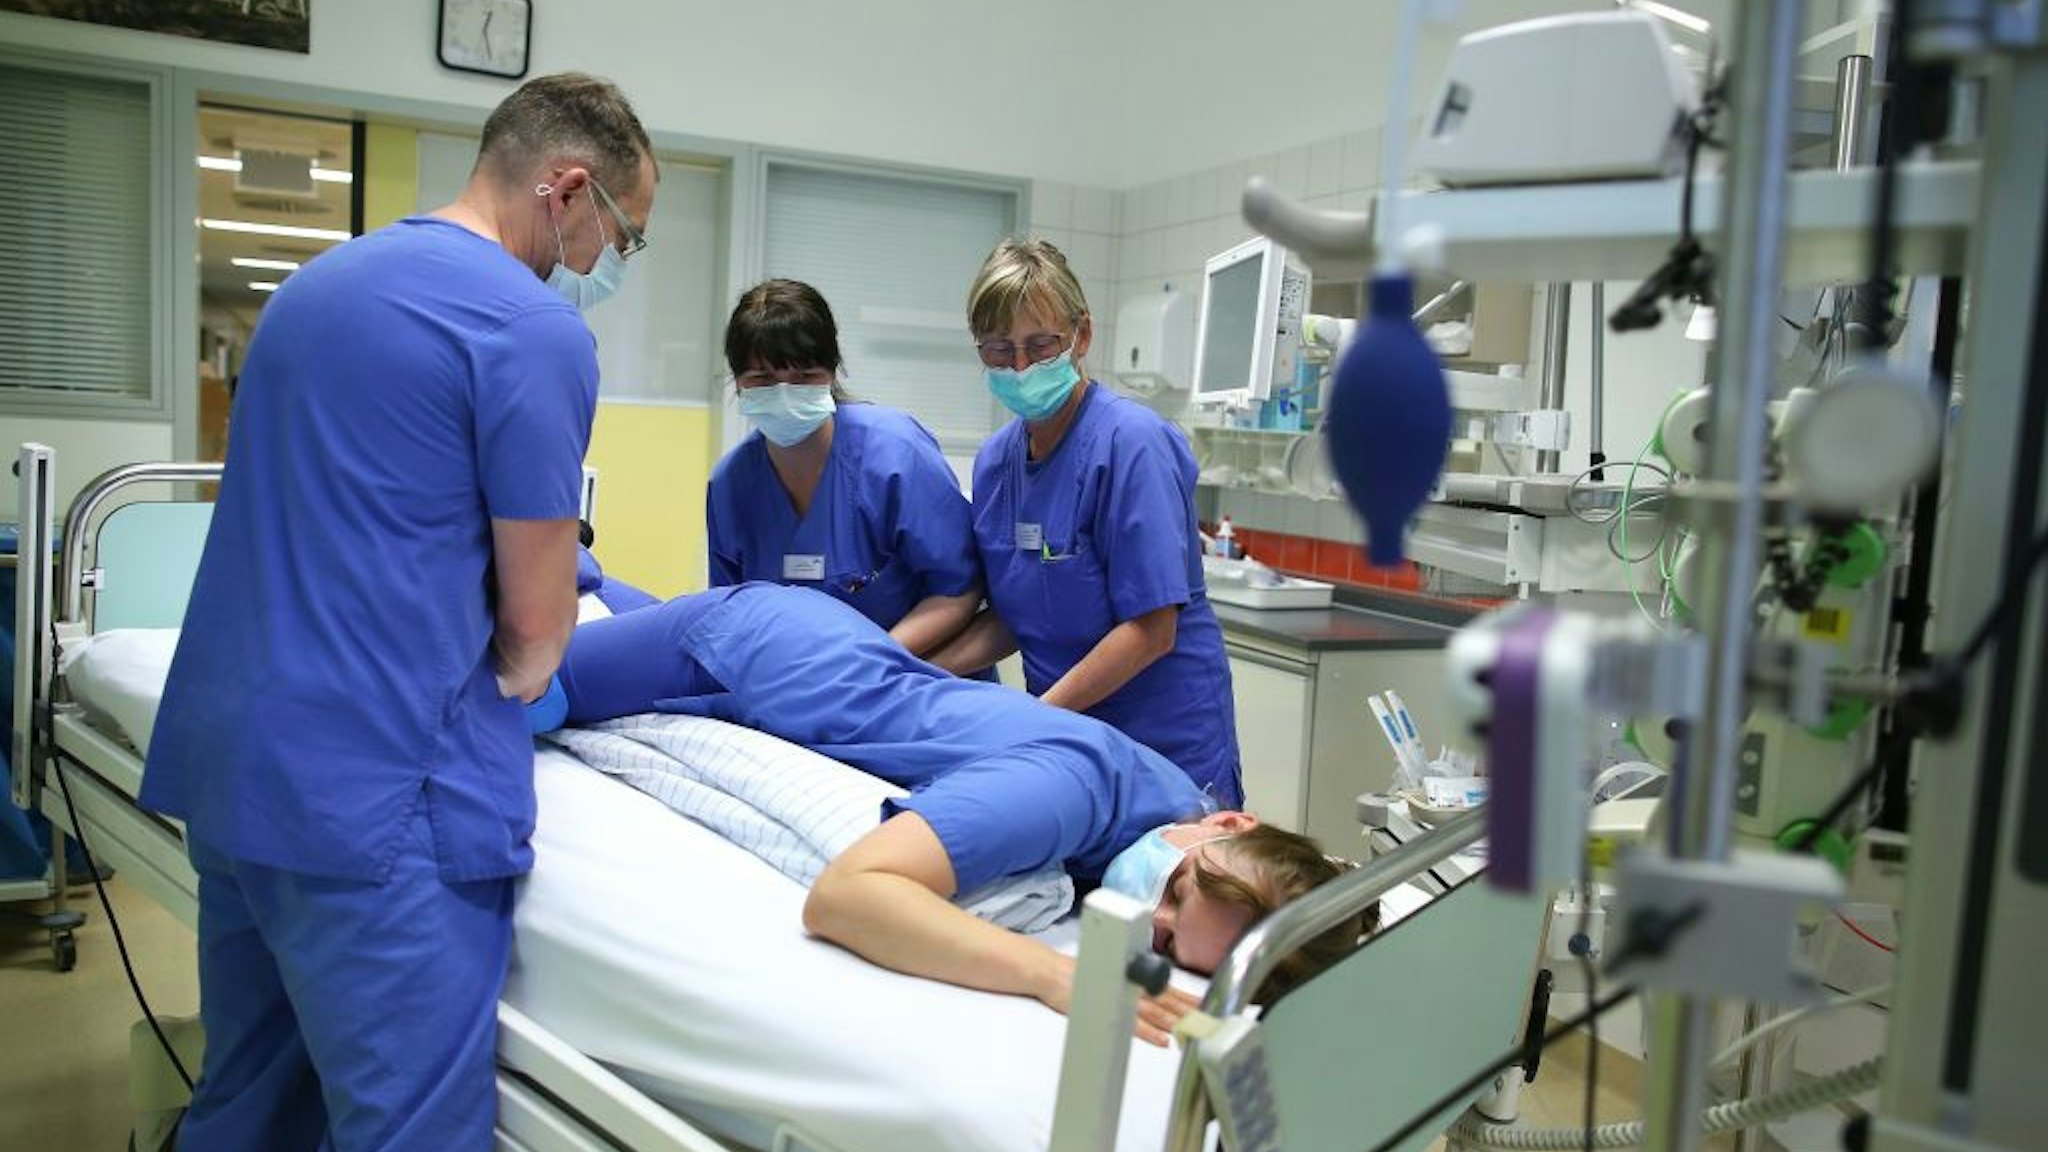 Nurse Carla Stuermer (3rd L) coaches medical staff how to reposition Covid-19 patients in the intensive care unit of the community hospital in Magdeburg, eastern Germany, on April 16, 2020 during the novel coronavirus COVID-19 pandemic. (Photo by Ronny Hartmann / AFP) (Photo by RONNY HARTMANN/AFP via Getty Images)